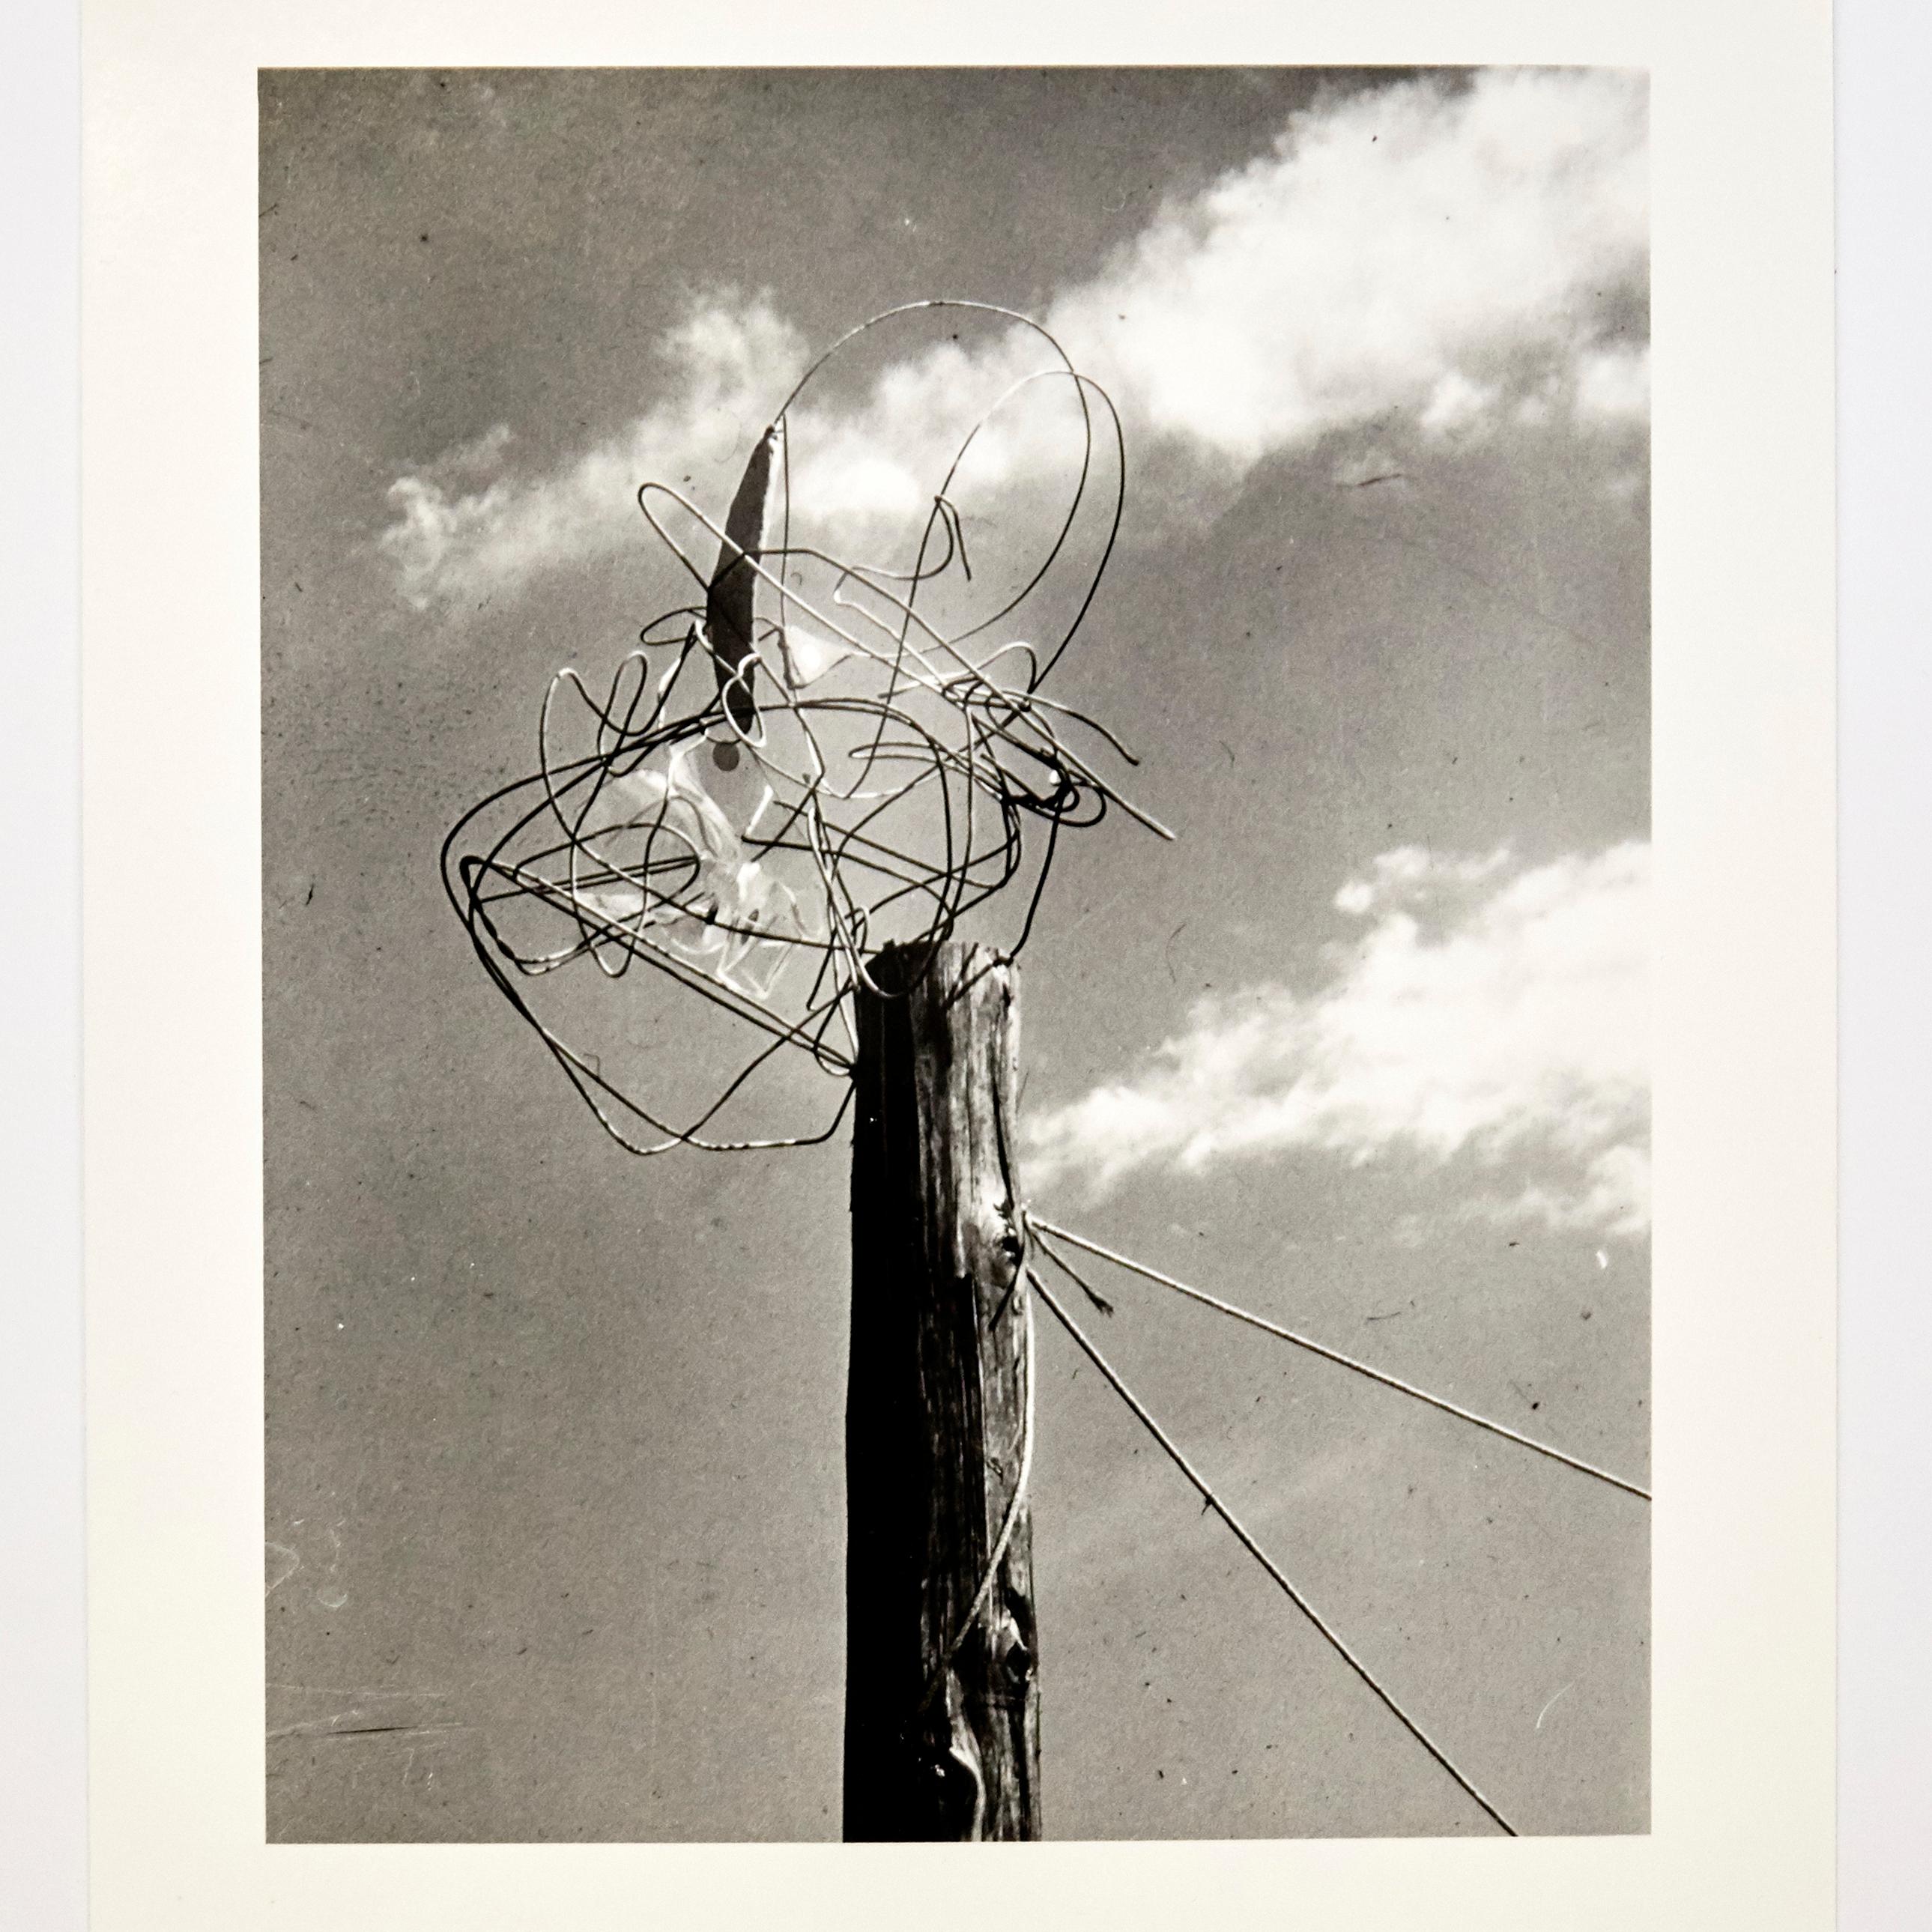 László Moholy-Nagy photography 6/6 from a set of 6 photographies.
Single edition of 'Light-Room Modulations' folder, original title 'Licht-Raum Modulationen.'
Published by Edition Griffelkunst in Hamburg, 2005.

On verso monogrammed and